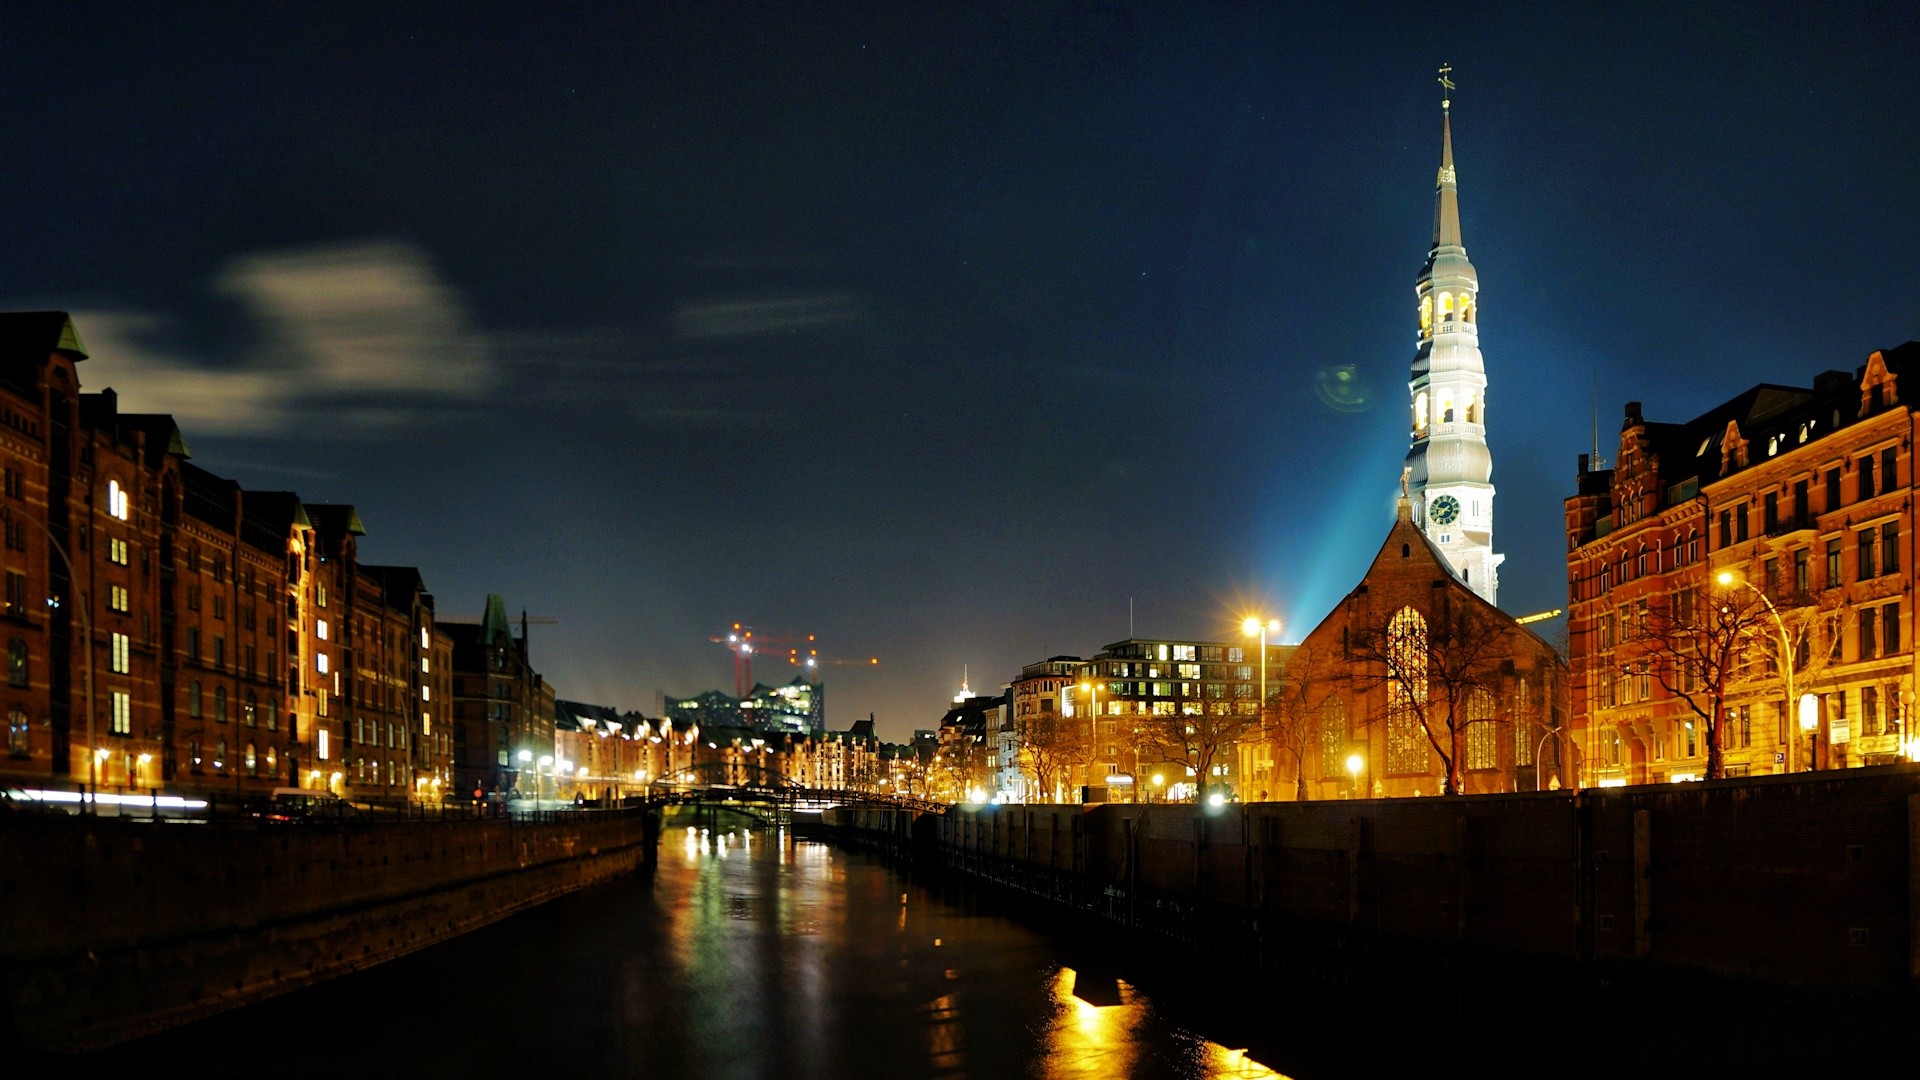 Architecture City Cityscape Hamburg Germany Water Old Building Night Lights Sky Church Clock Tower R 1920x1080